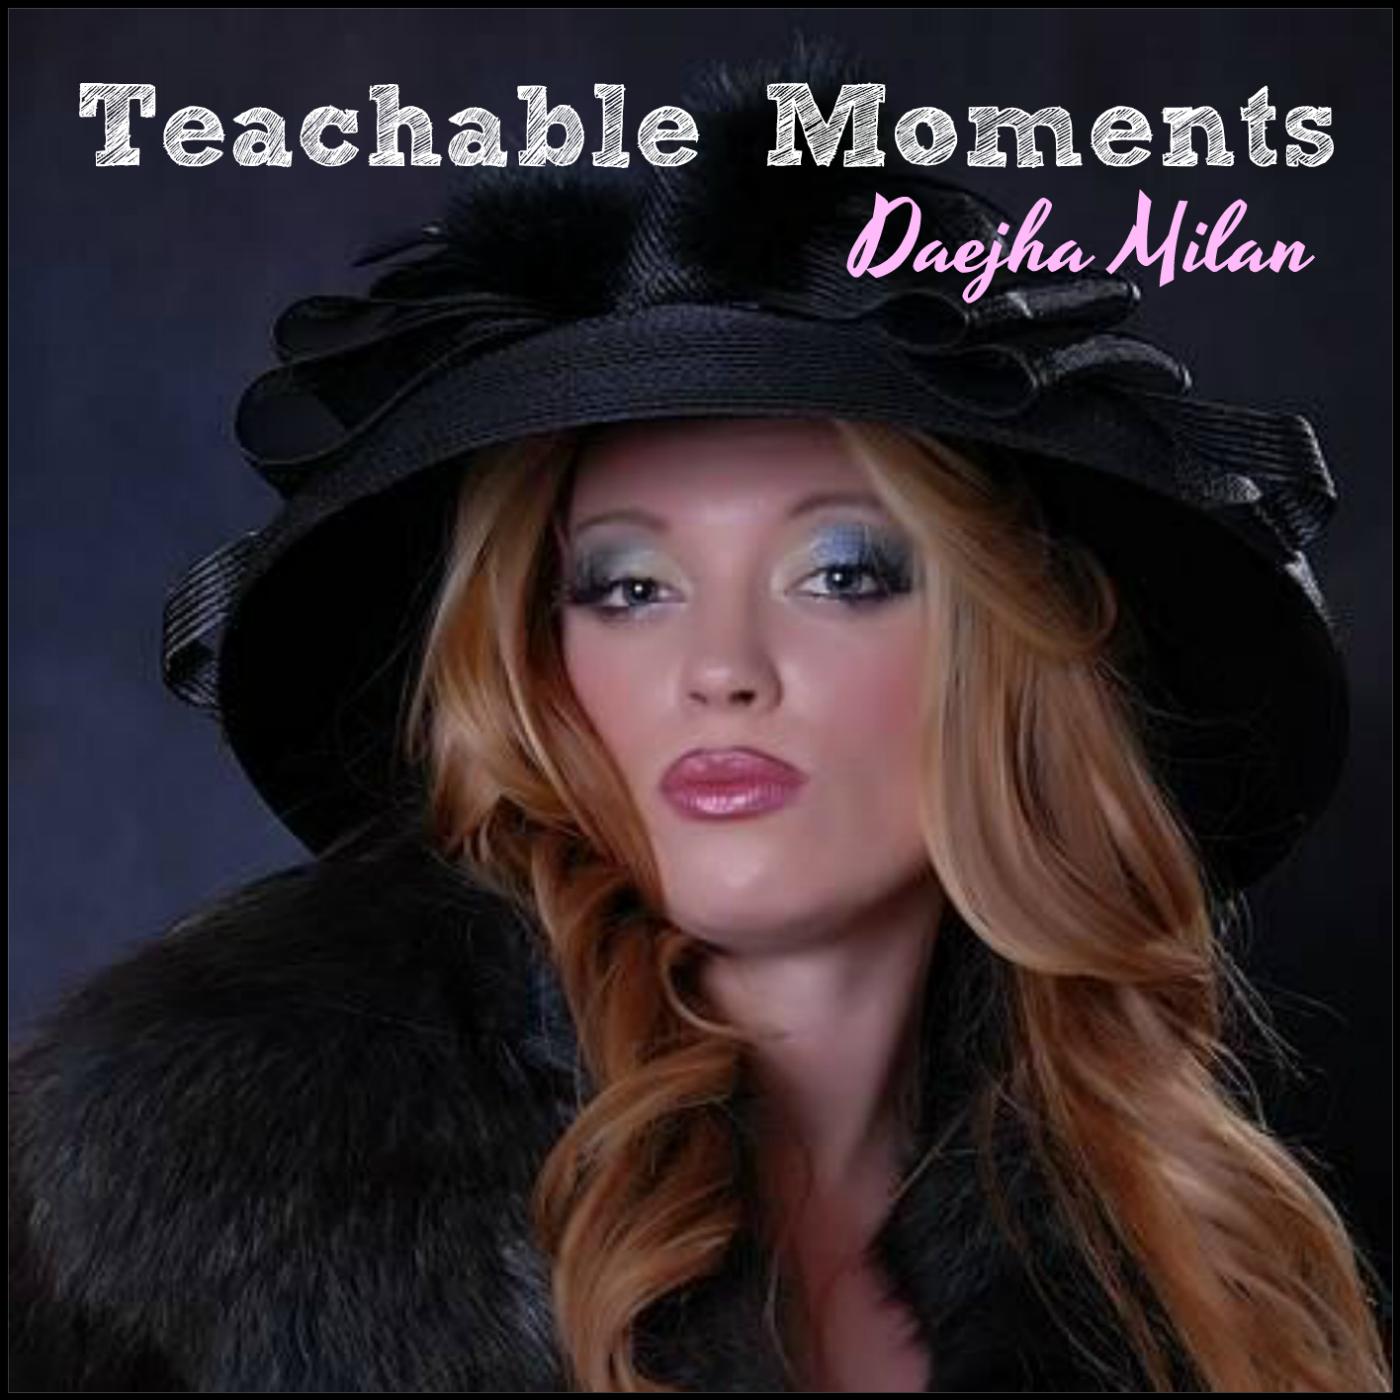 Teachable Moments with Daejha Milan podcast - Free on The Podcast App